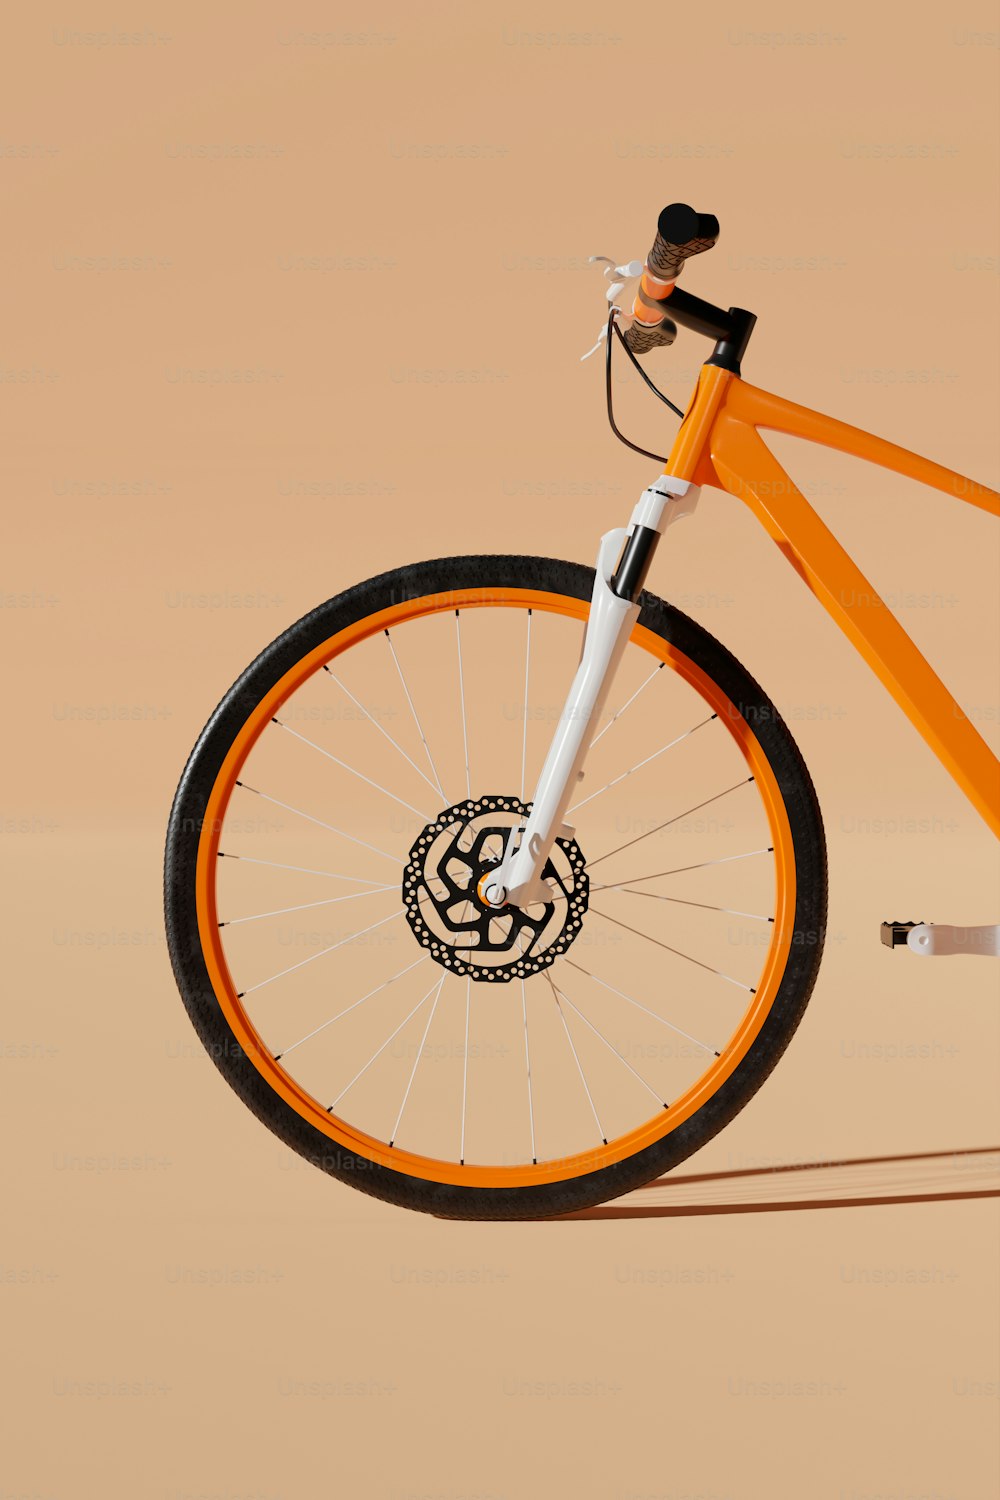 an orange bike with a black and white emblem on the front wheel